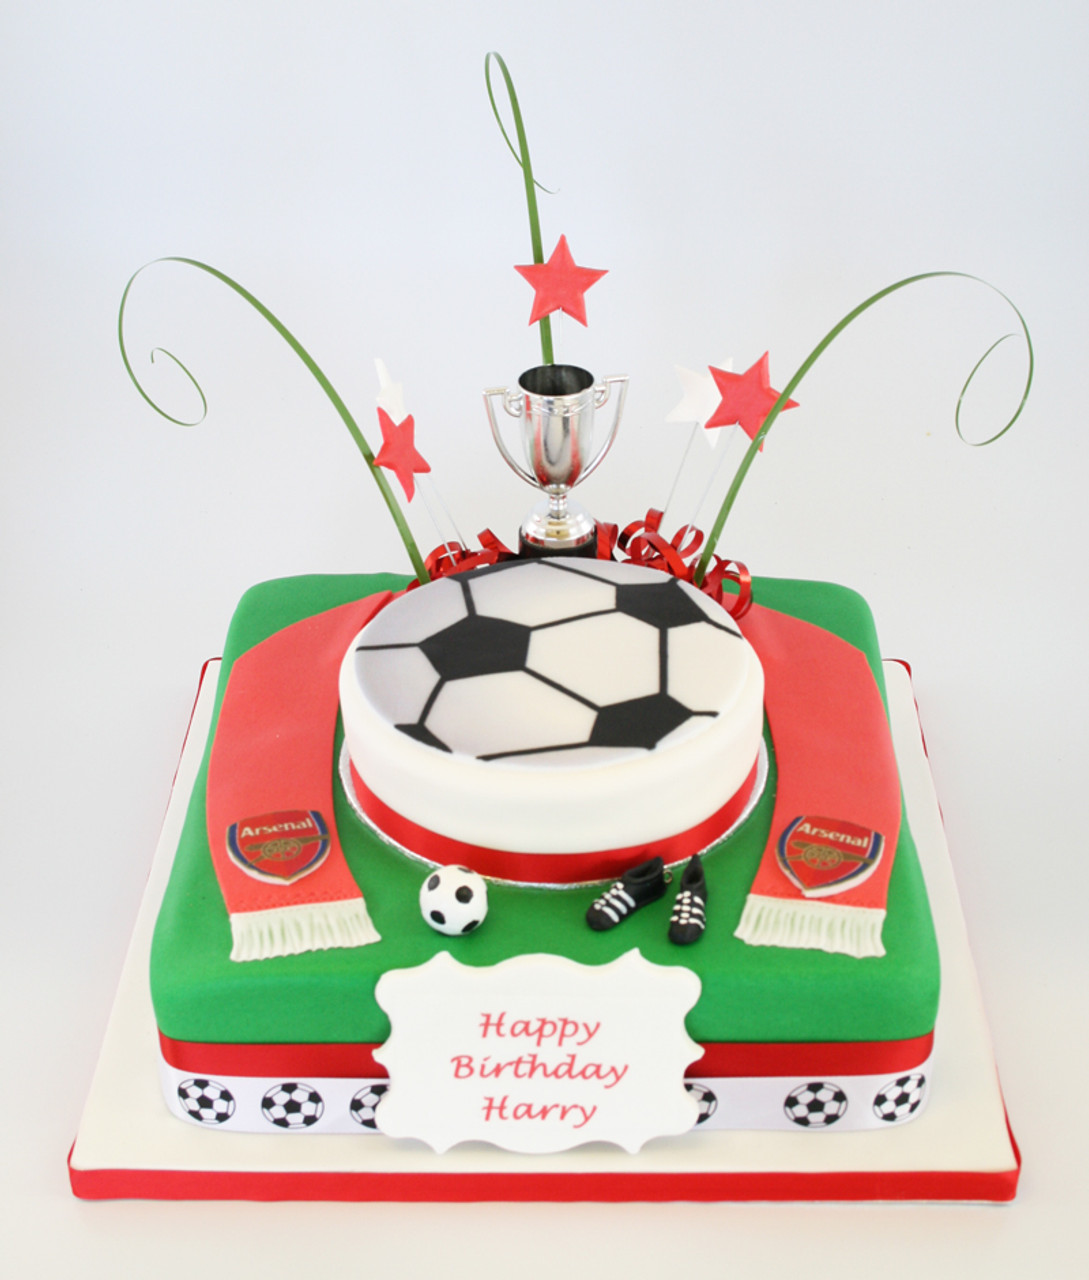 Buy Fondant Football Cake: Score Big at Your Party at Grace Bakery,  Nagercoil